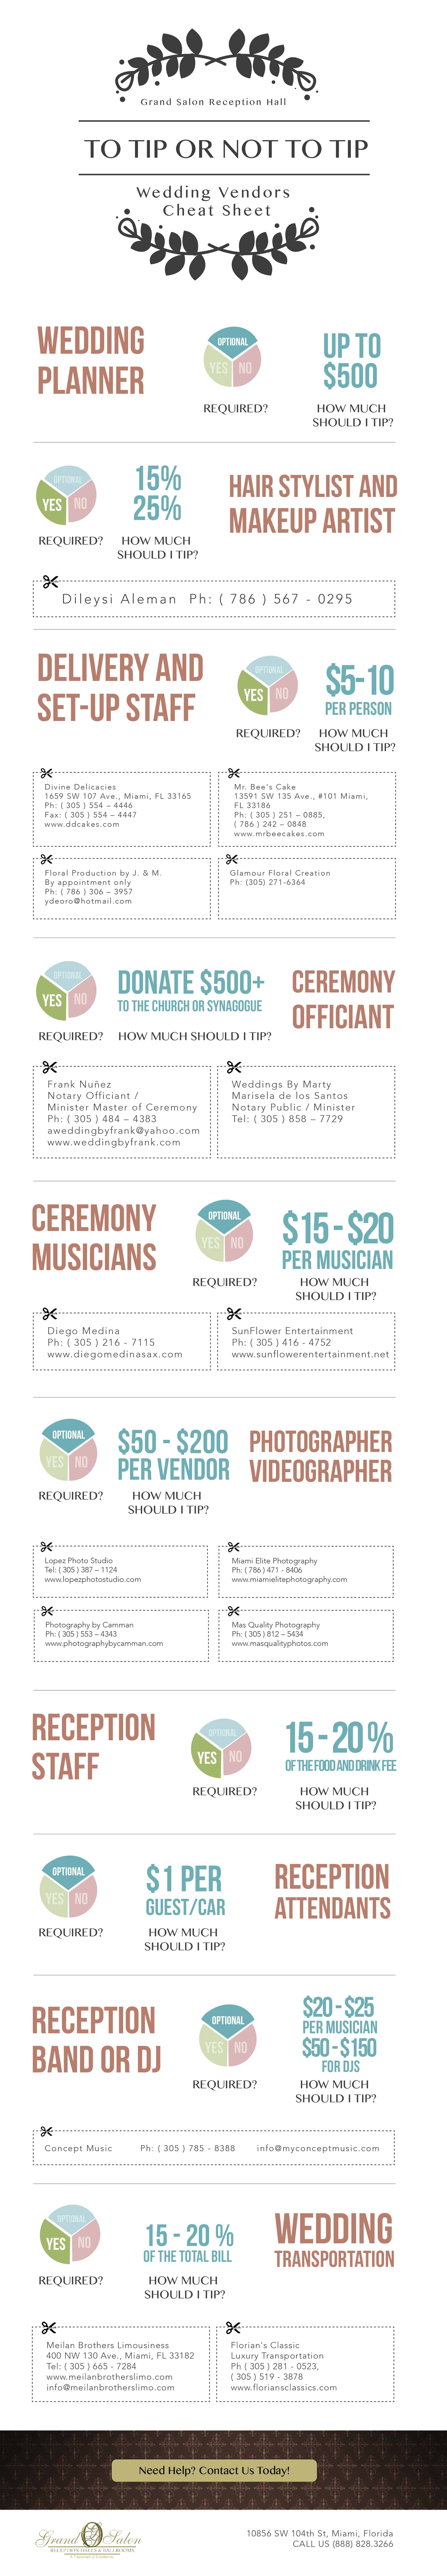 Tipping Infographic | To Tip Or Not To Tip: Wedding Vendors | Wedding Venues